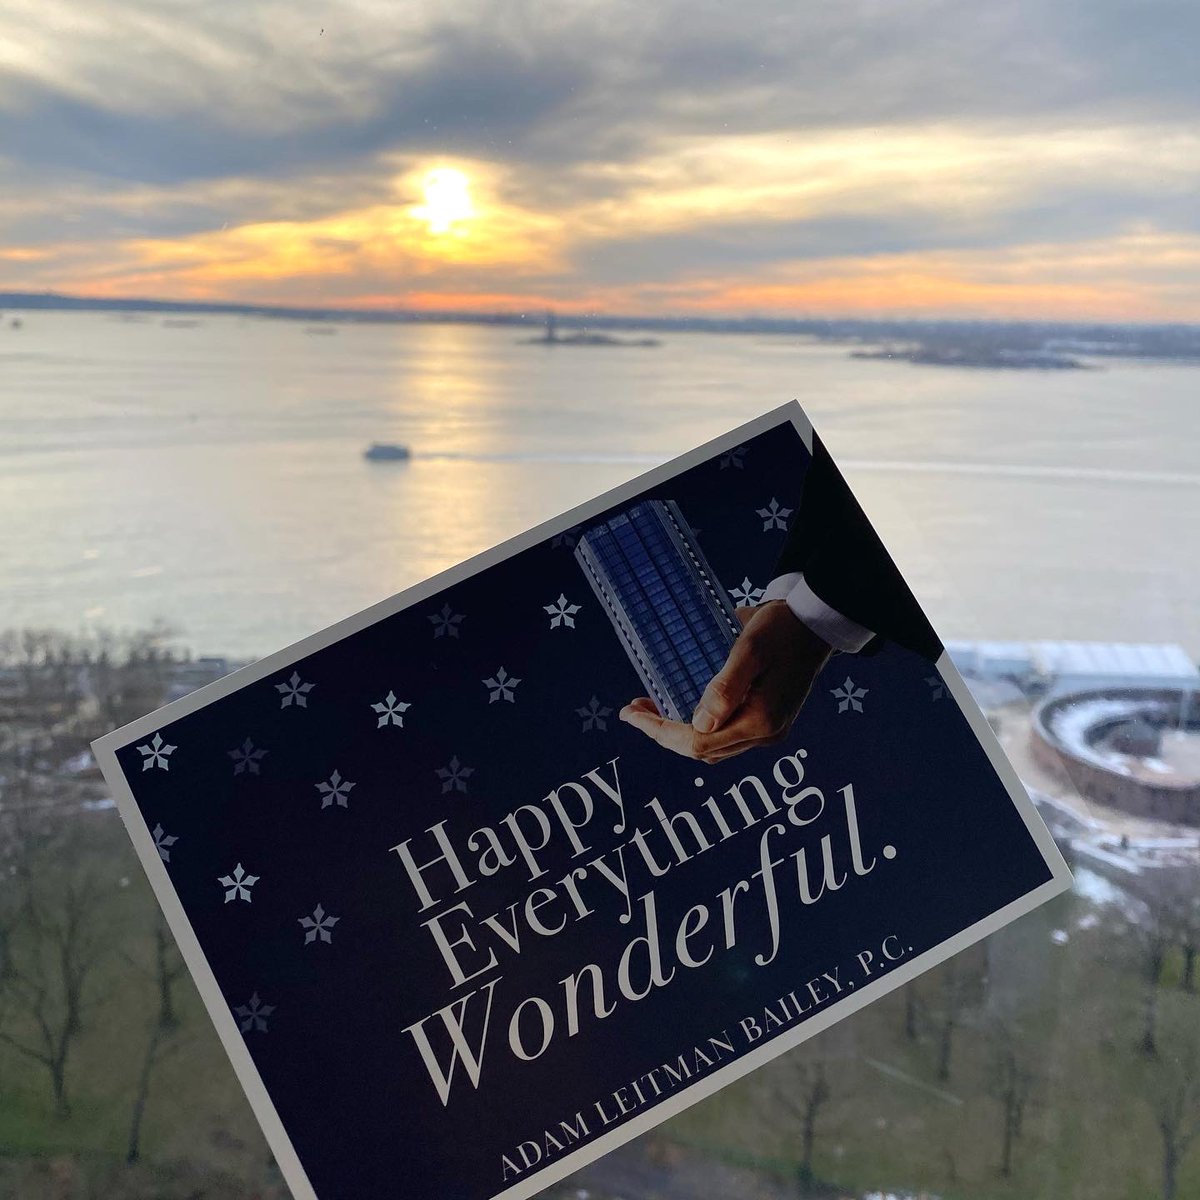 Tis’ the season to be thankful. From our office to your home, Adam Leitman Bailey, P.C. wishes everyone a safe, healthy, and happy holidays. 

#happyholidays2020 #ThankfulNoMatterWhat  #HappyNewYear2021 #HealthyAtHome  #SafetyFirst